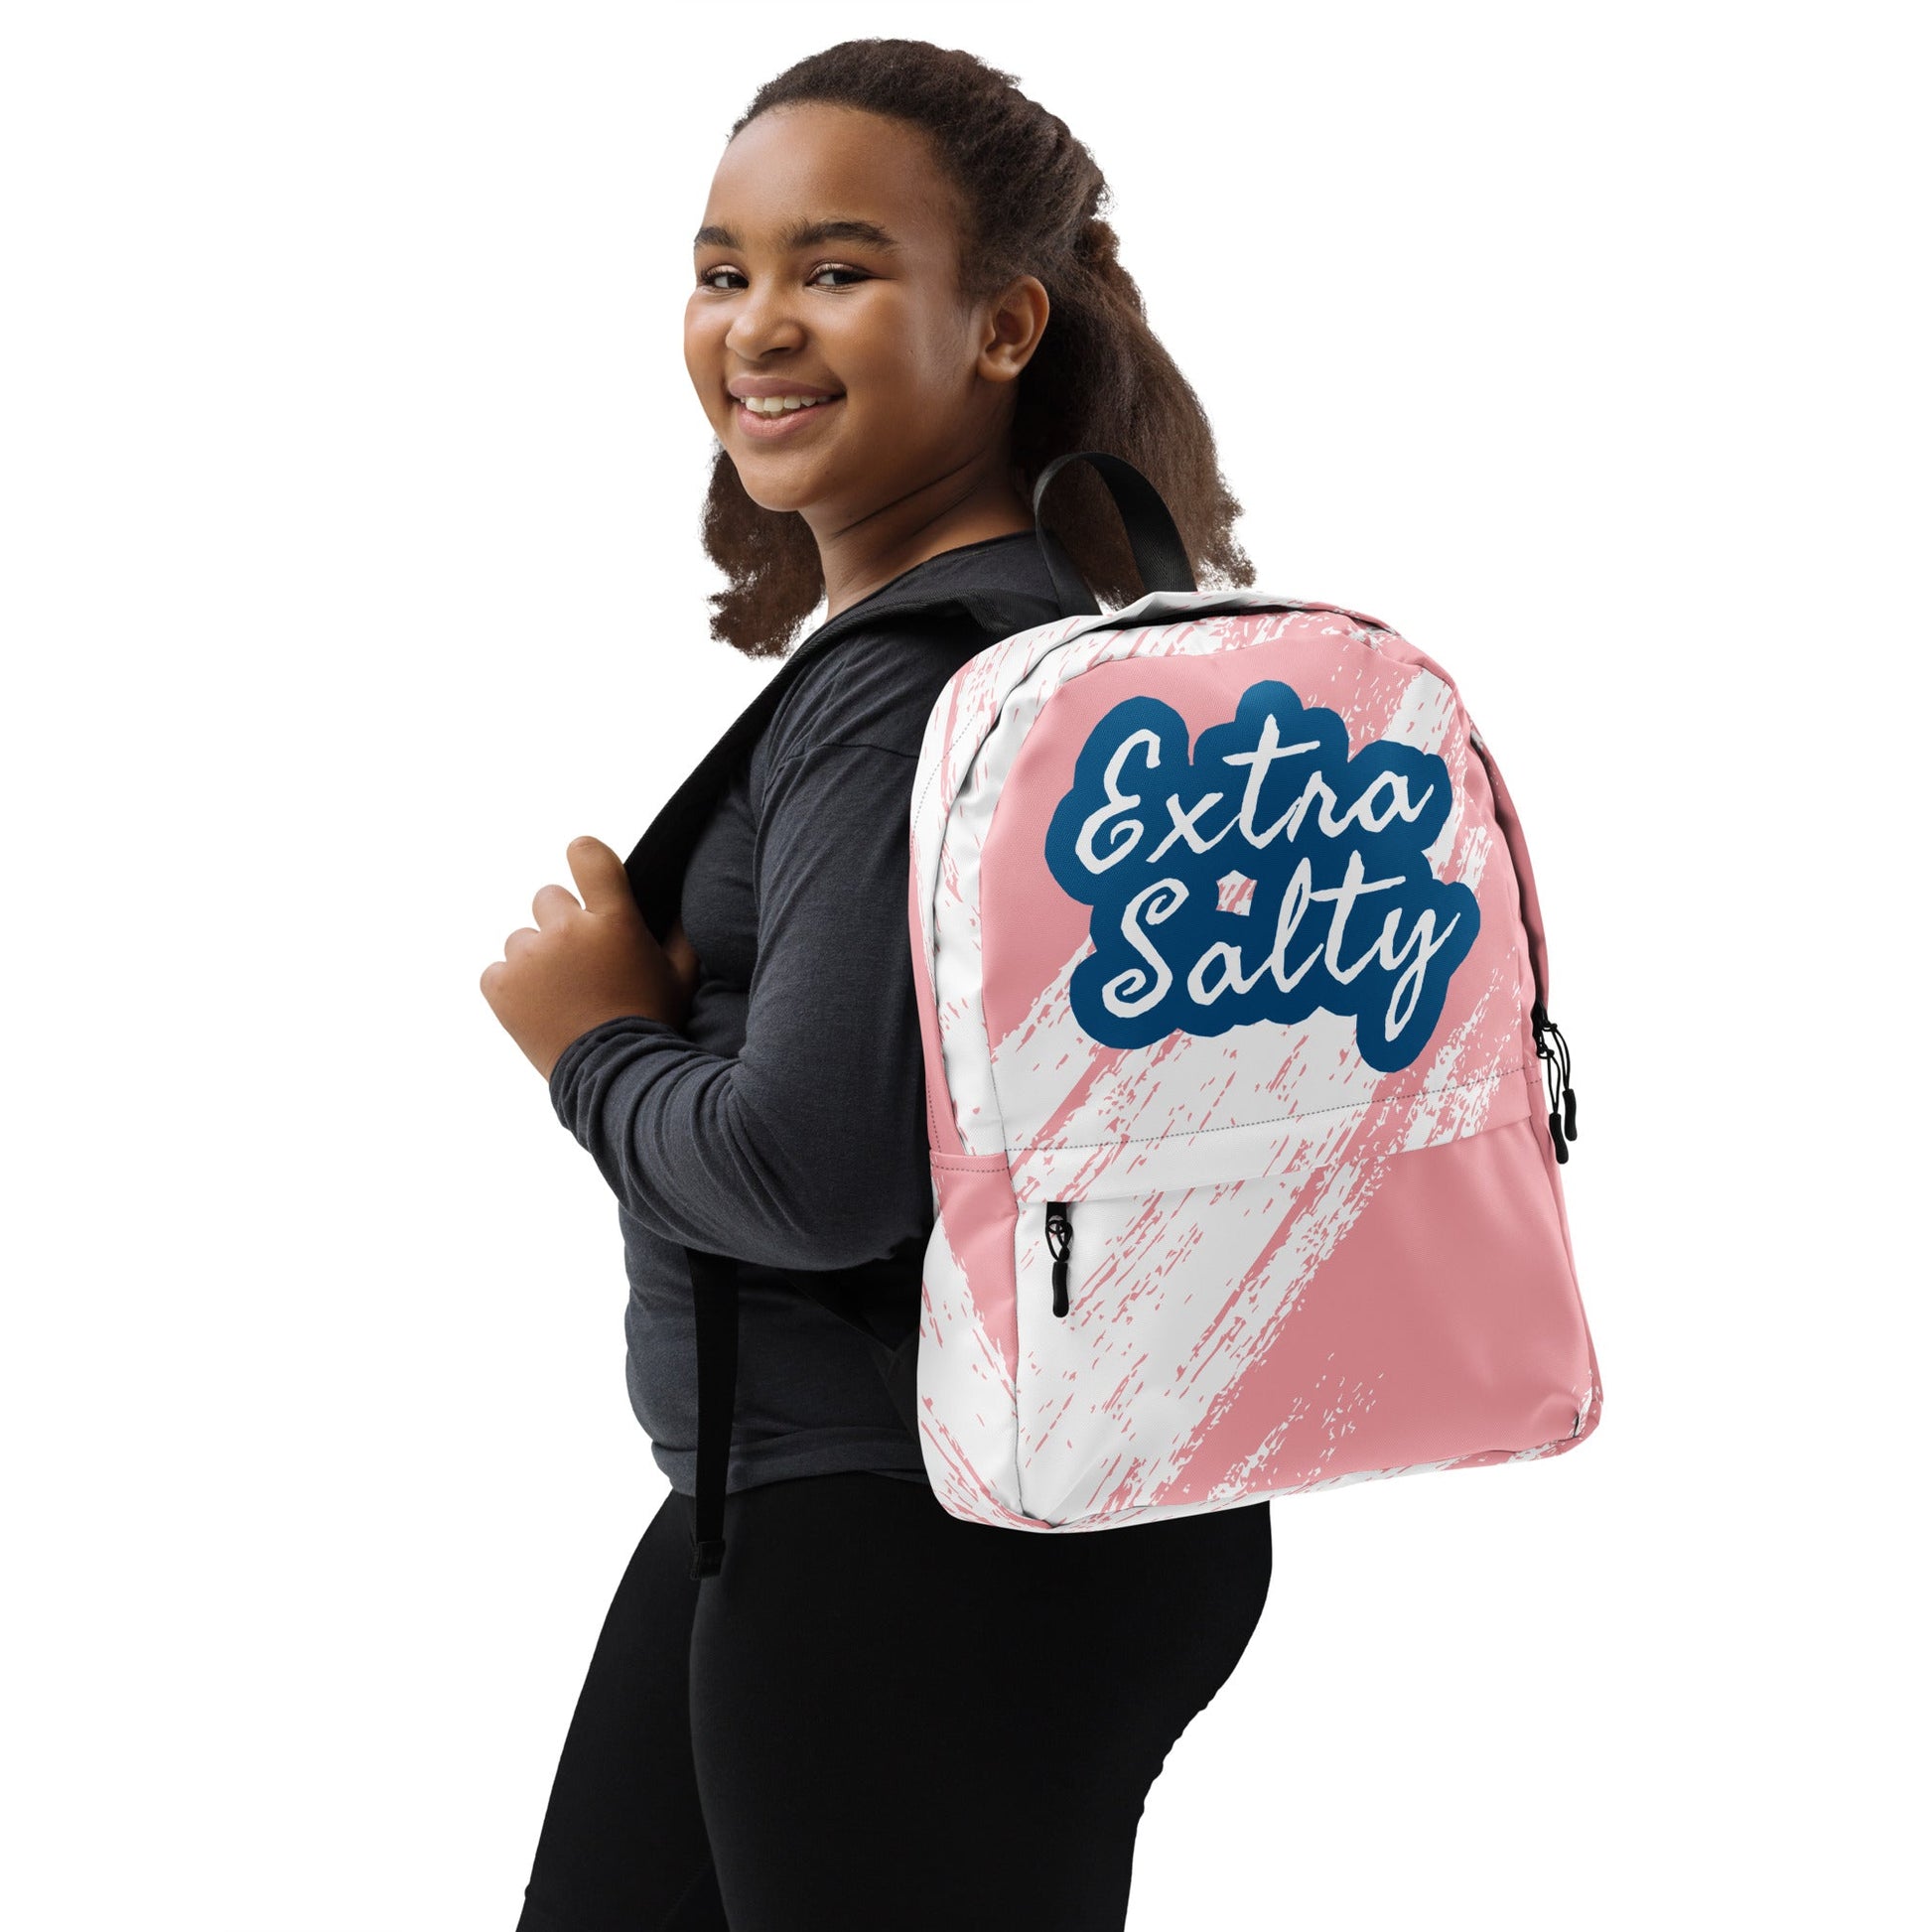 "Extra Salty" Backpack - The Nerd Supply Company